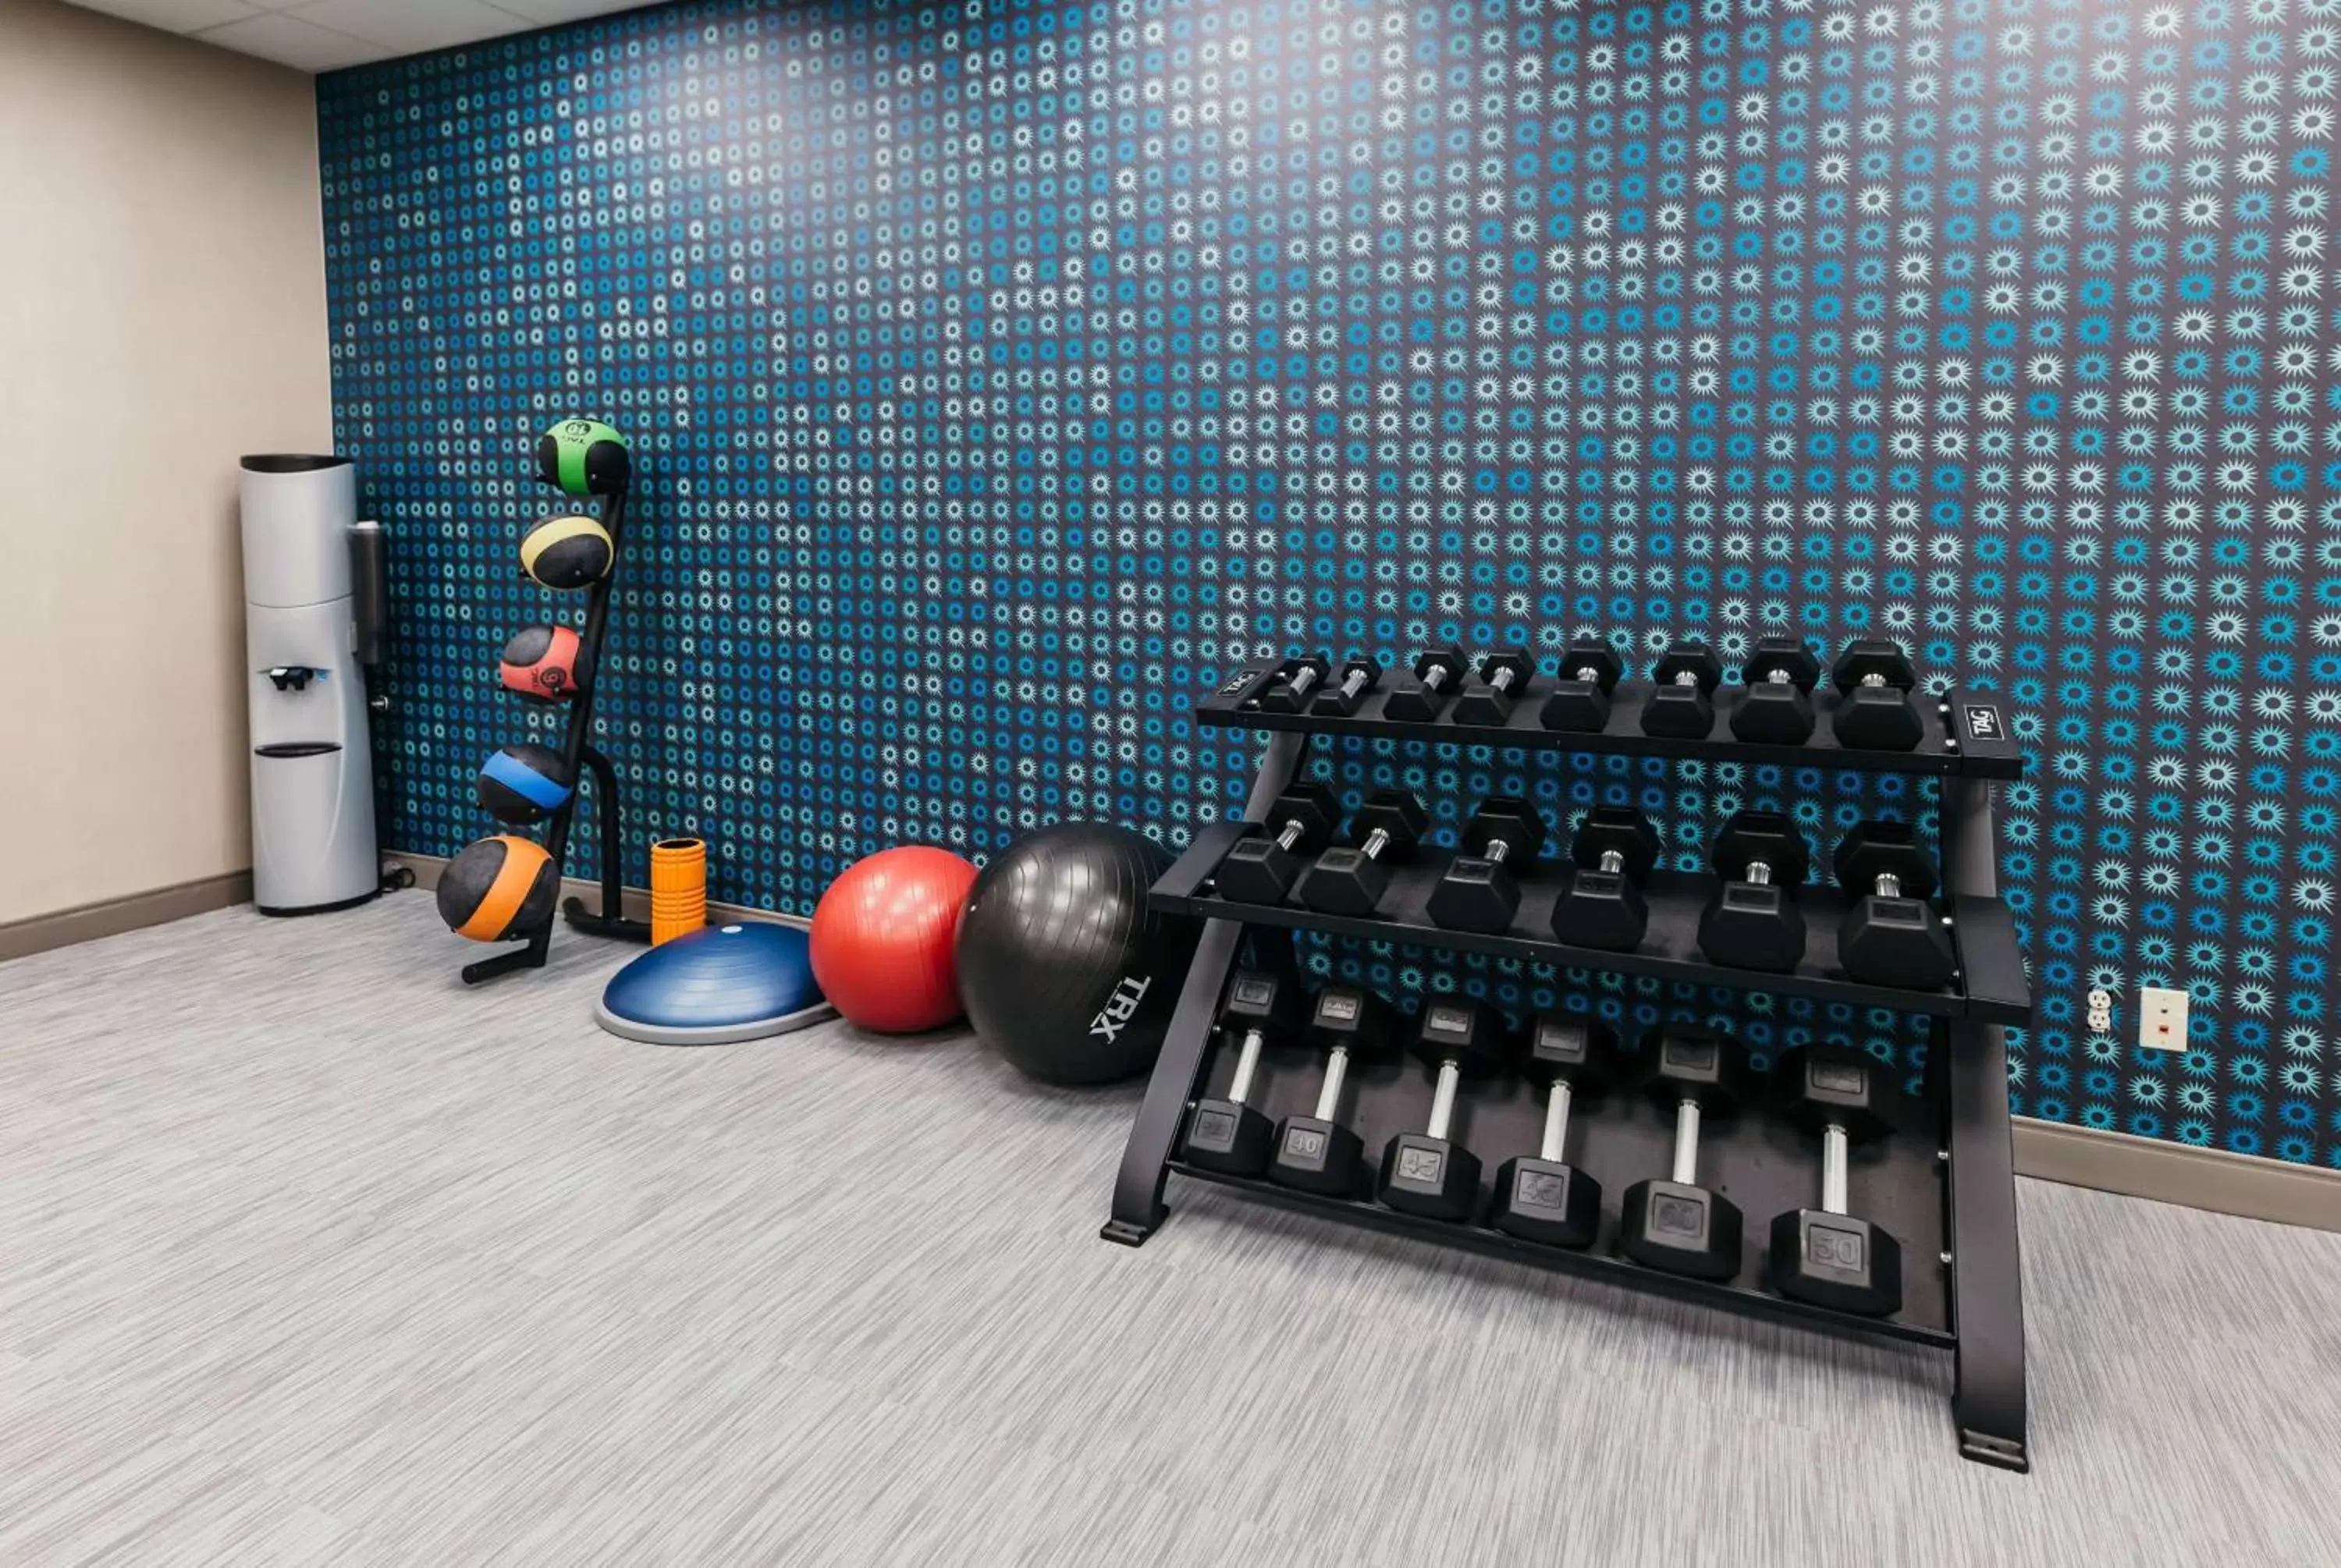 Fitness centre/facilities, Fitness Center/Facilities in La Quinta Inn & Suites by Wyndham Ankeny IA - Des Moines IA